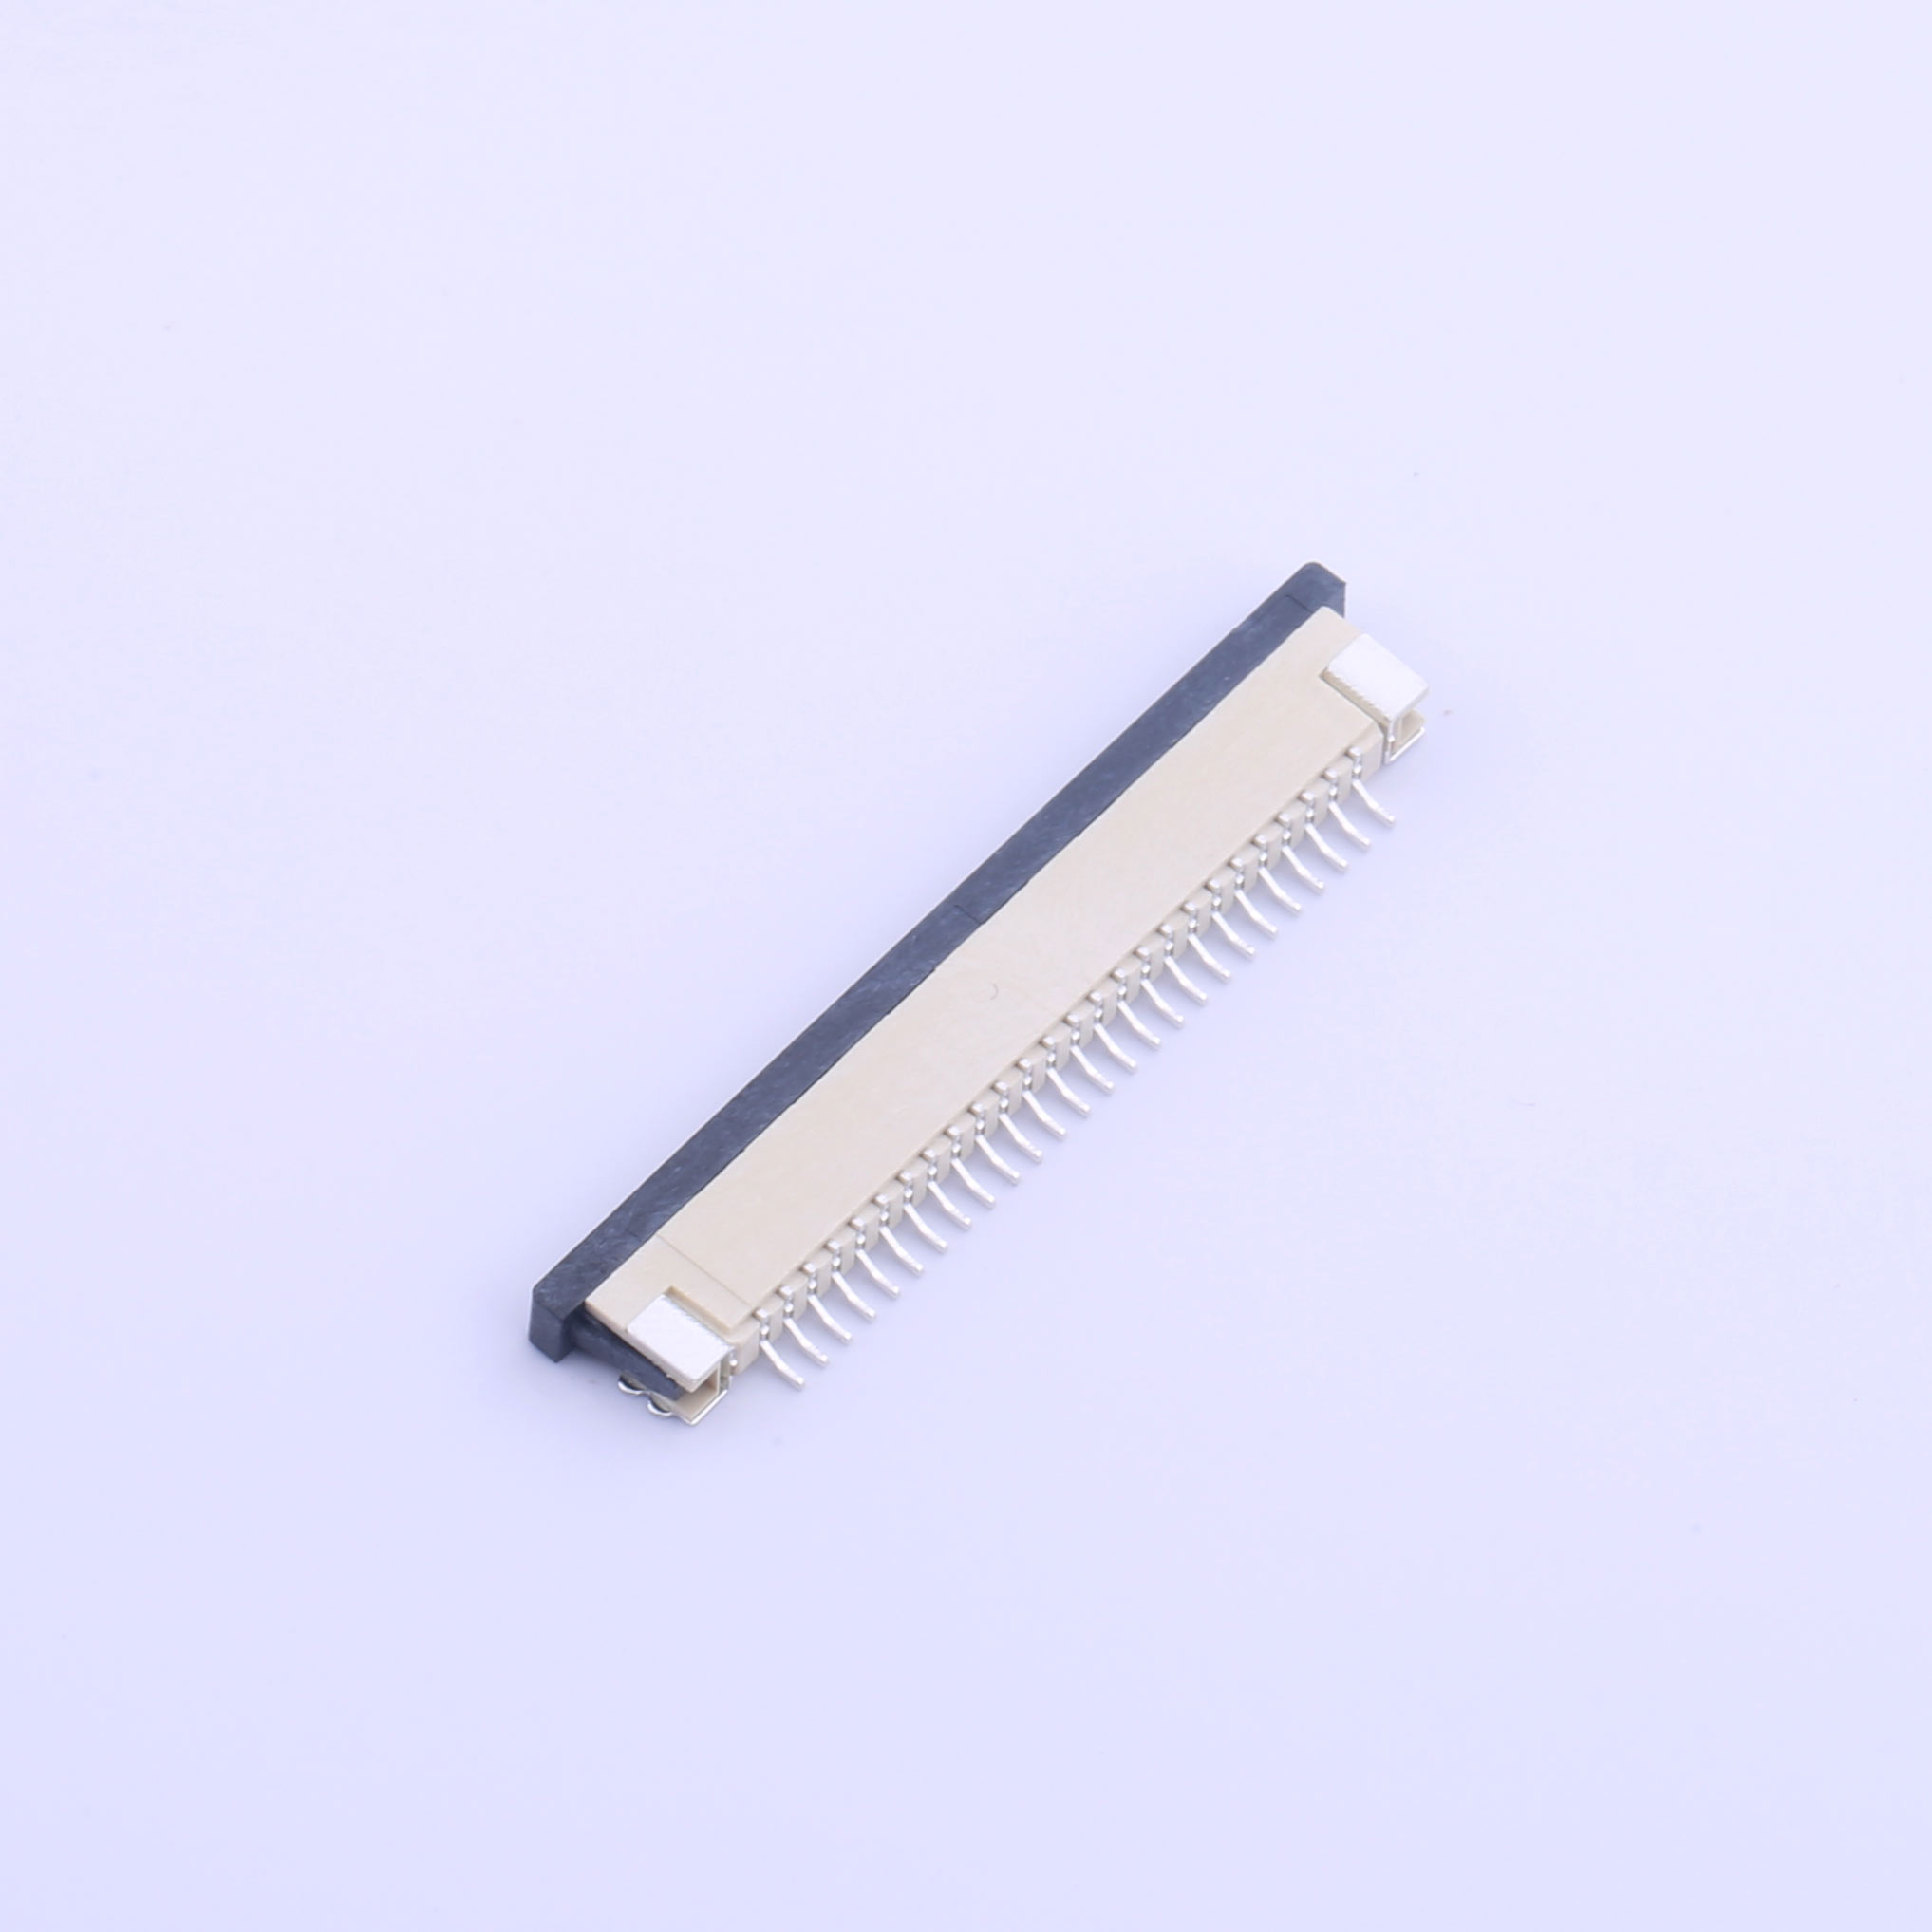 Kinghelm FFC/FPC Connector 26p Pitch 1mm - KH-CL1.0-H2.5-26pin